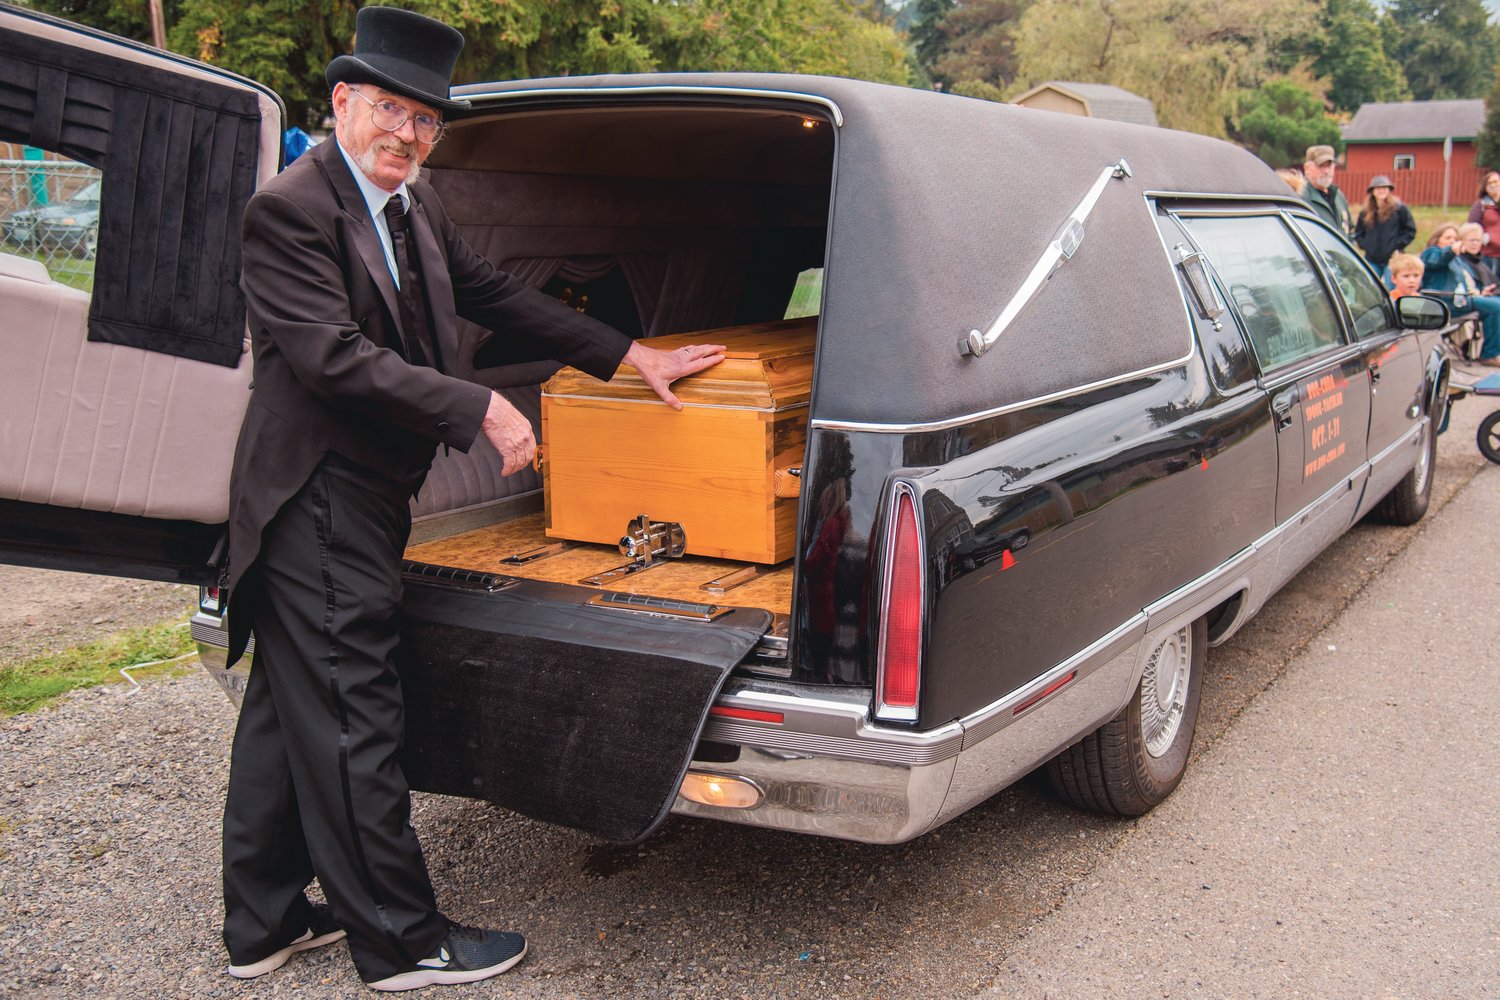 Steve Purcell smiles as he opens the back of “Hearsela,” a Cadillac hearse, to reveal a casket before the Casket Races outside Bucoda Town Hall Saturday afternoon.